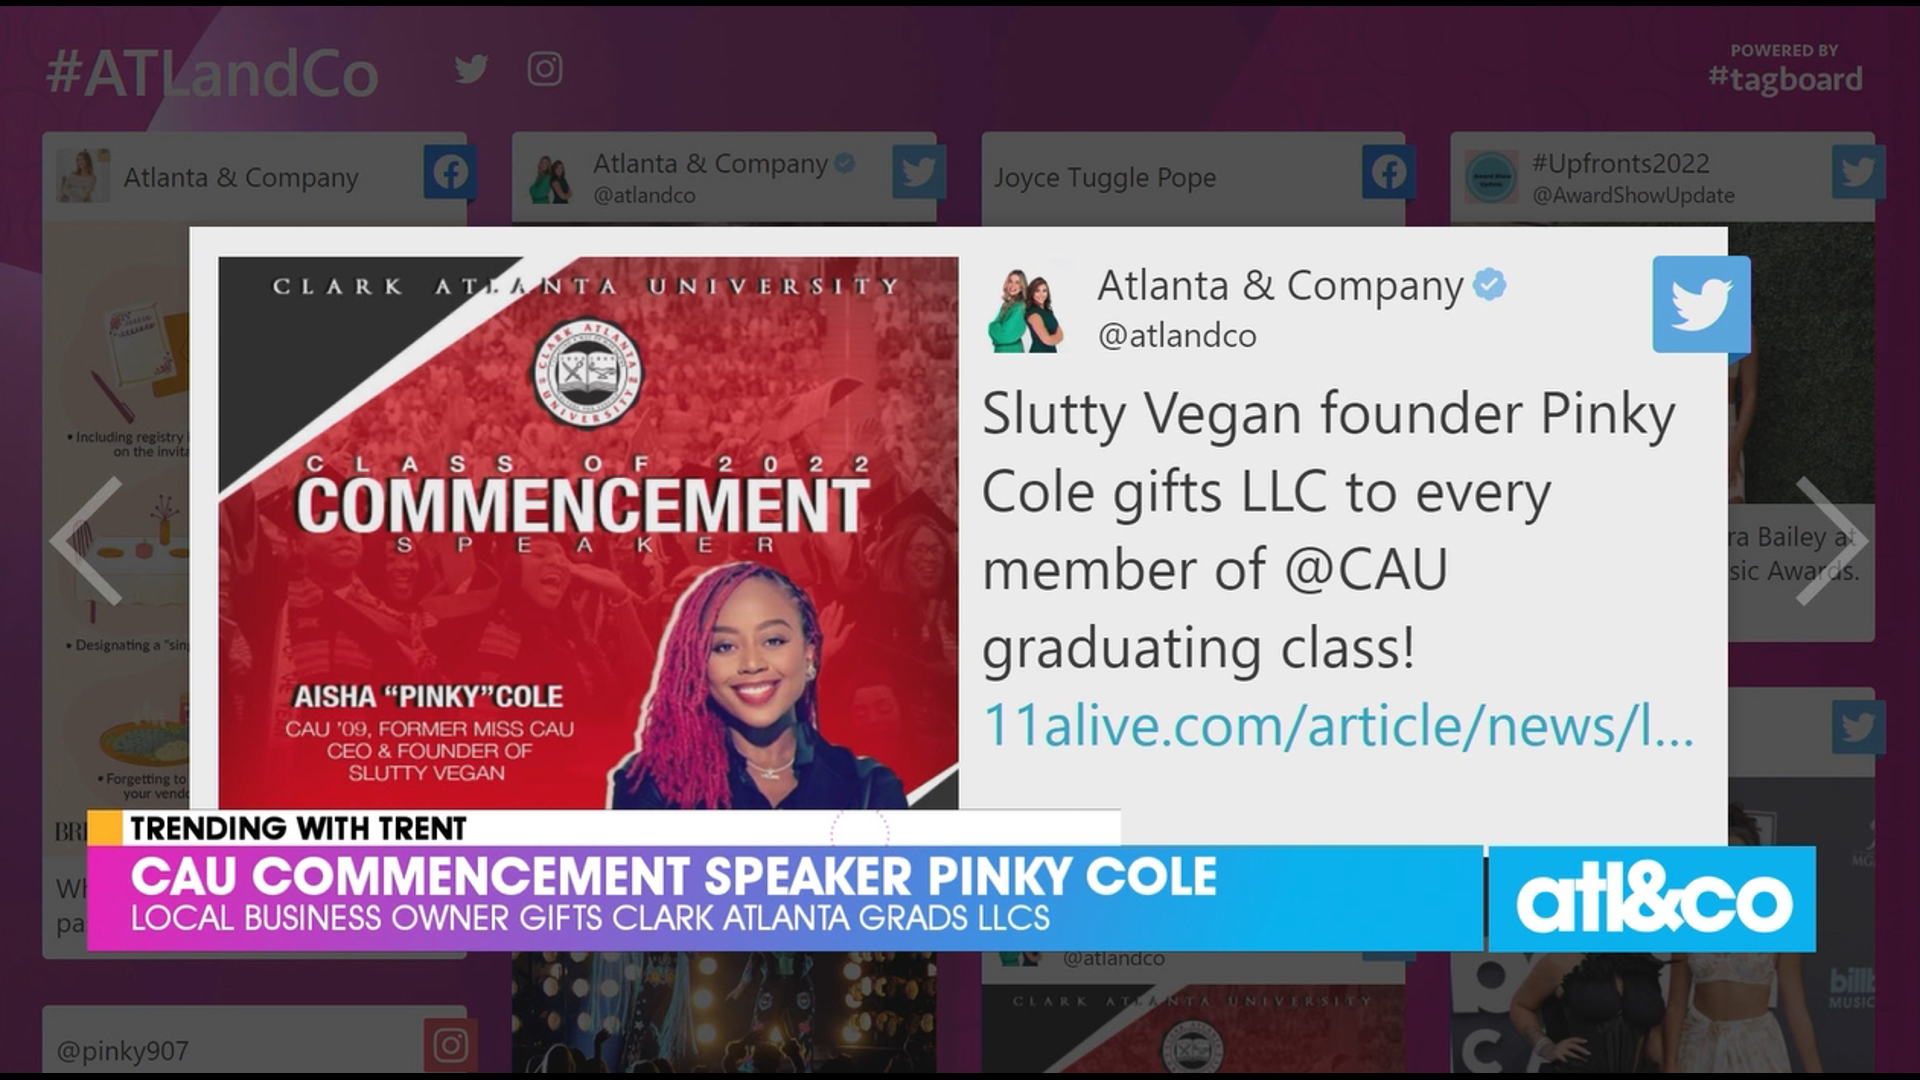 From local entrepreneur/Clark Atlanta grad Pinky Cole to country icon Naomi Judd's celebration of life... see what's Trending with Trent.